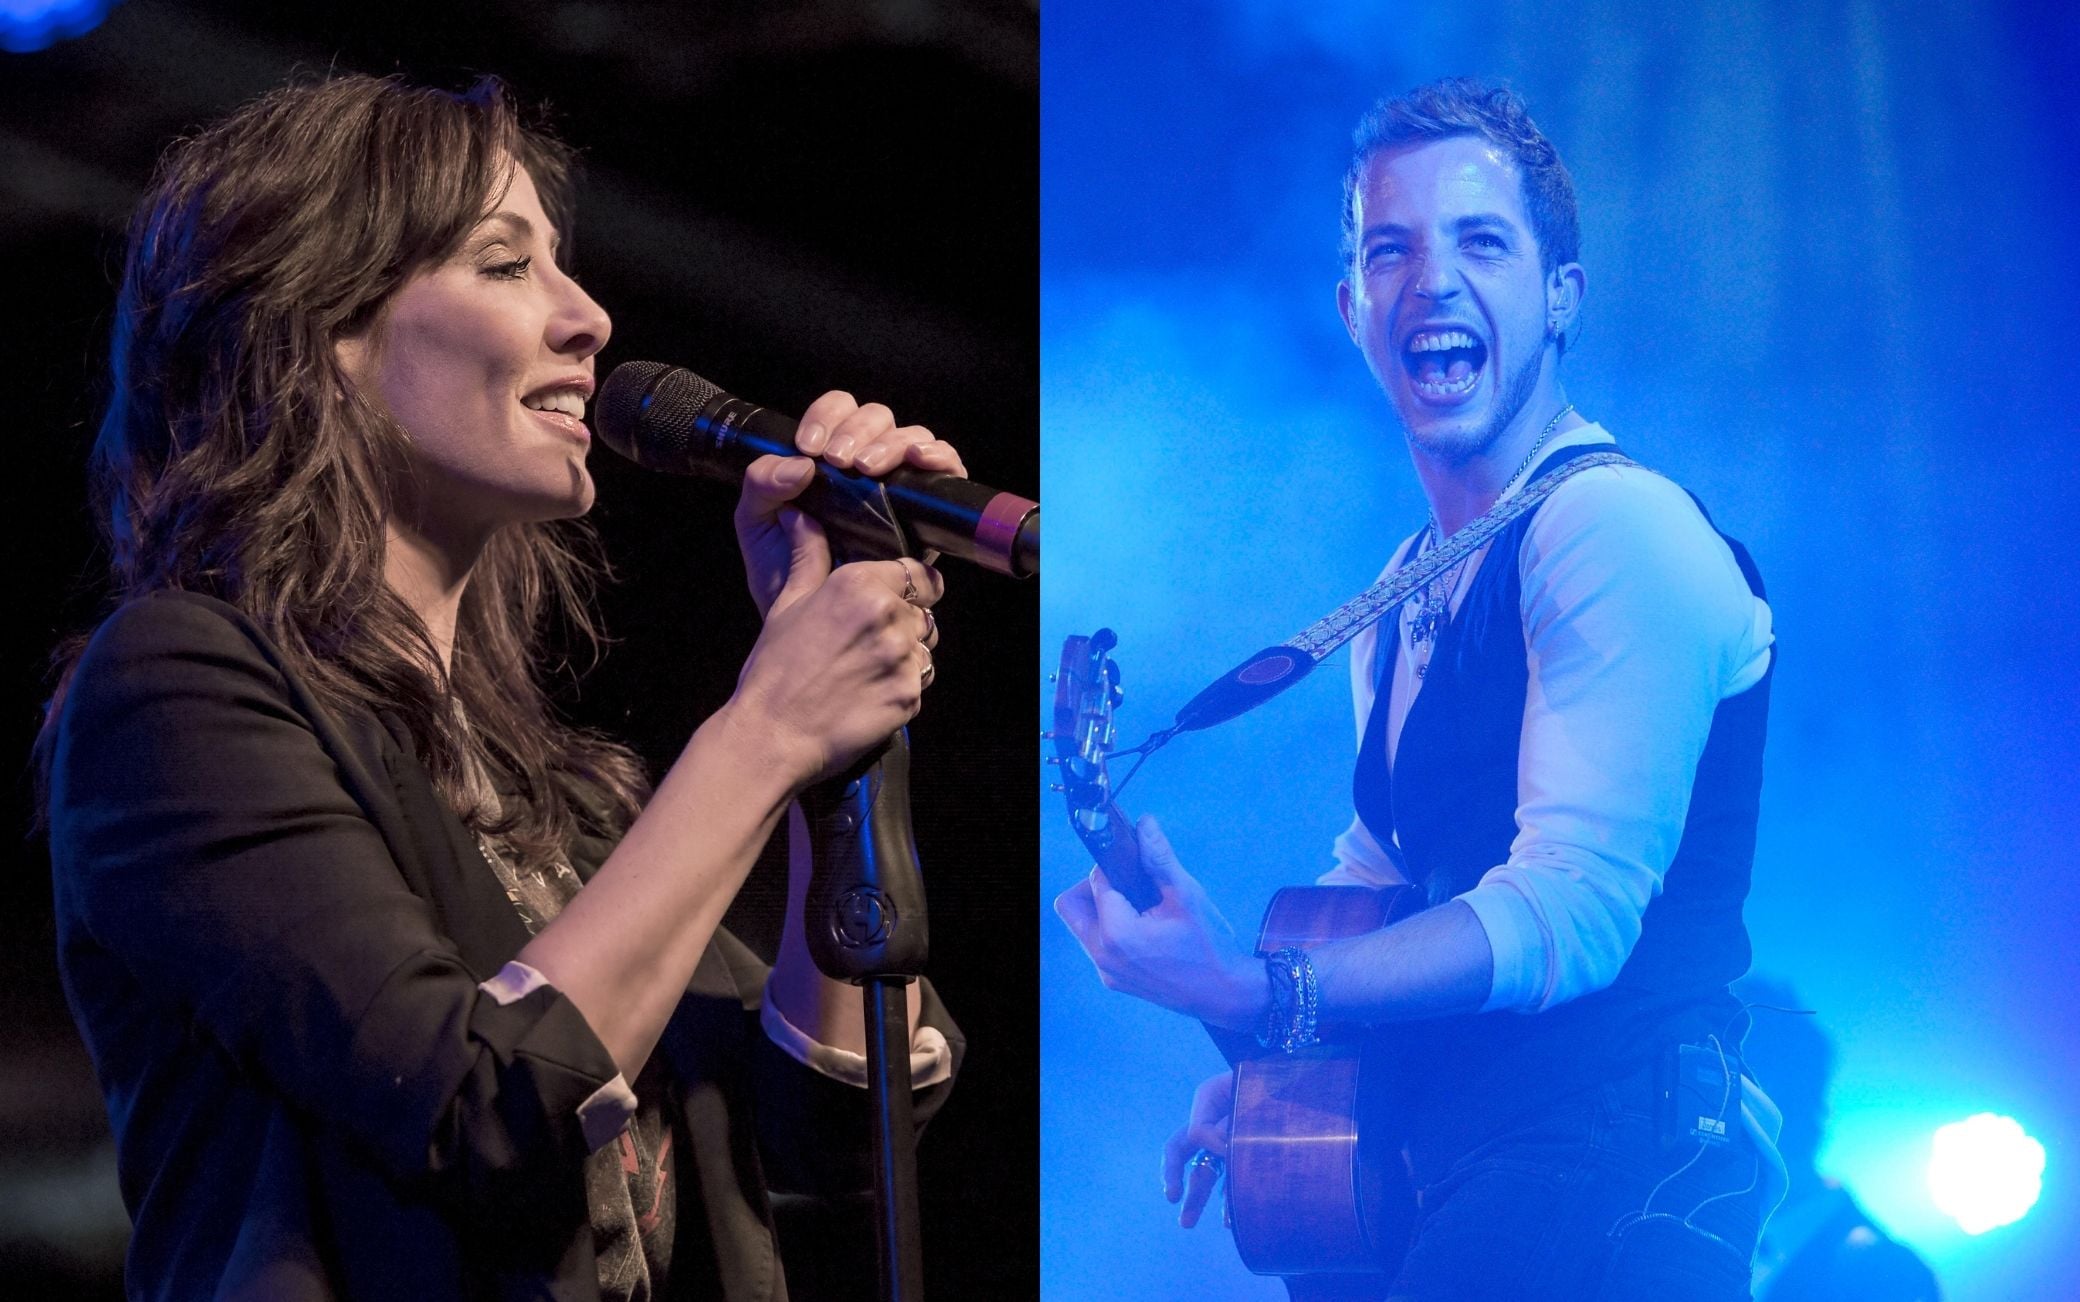 James Morrison and Natalie Imbruglia in concert in Prato: info, dates and tickets